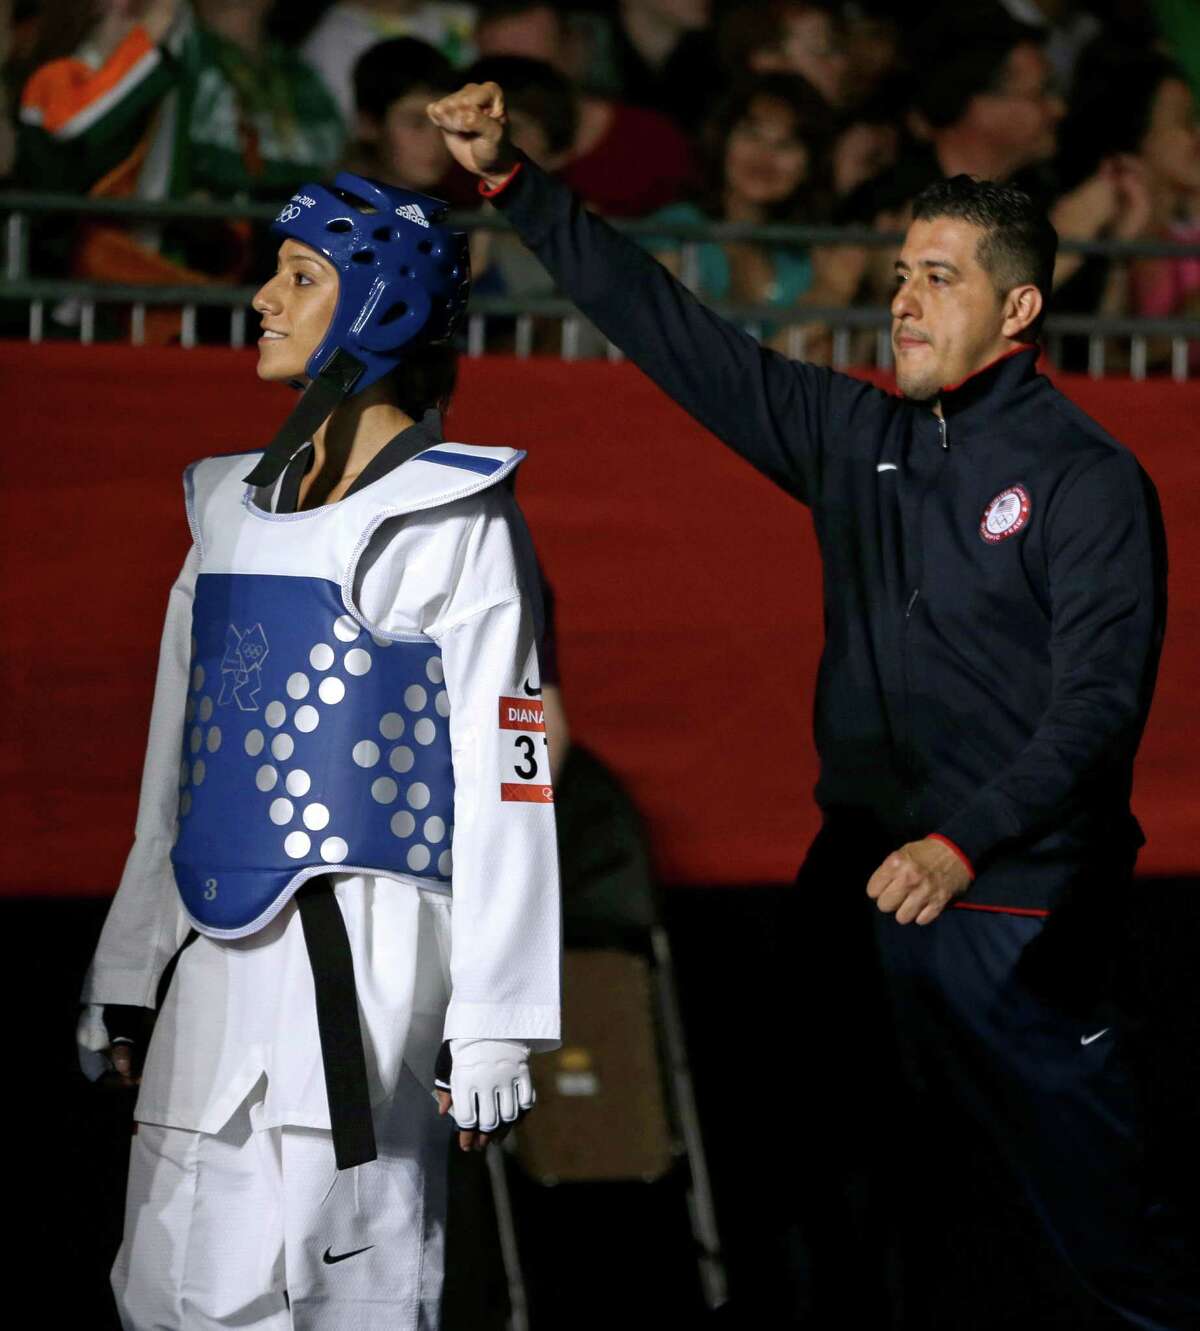 United States' Diana Lopez makes her way to fight China's Hou Yuzhuo in women's 57-kg taekwondo competition at the 2012 Summer Olympics, Thursday, Aug. 9, 2012, in London.